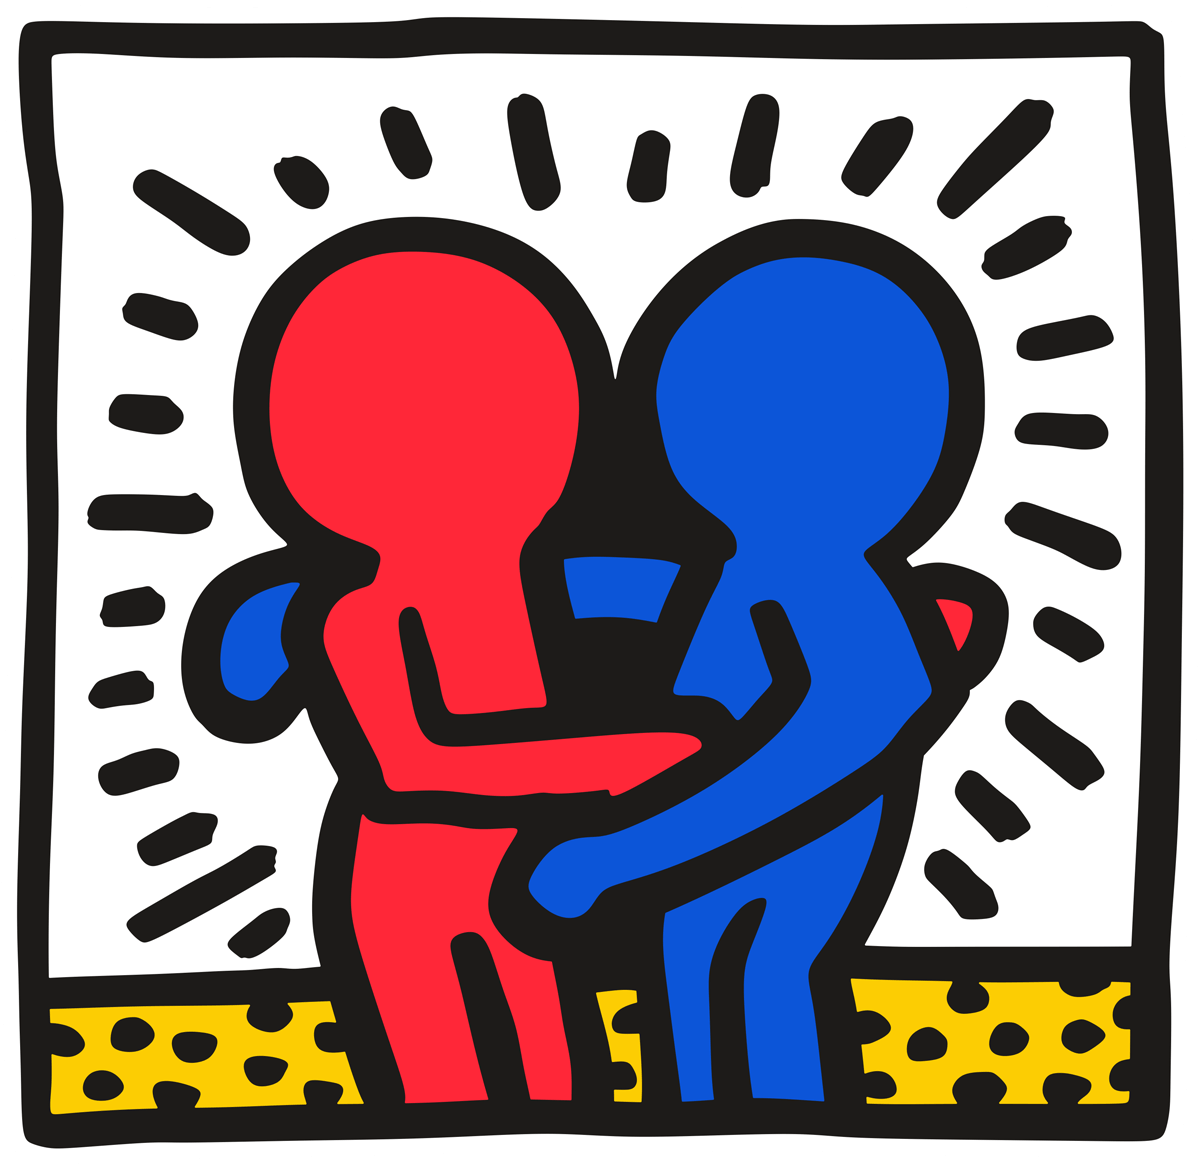 Autocollants: Embrasser Keith Haring